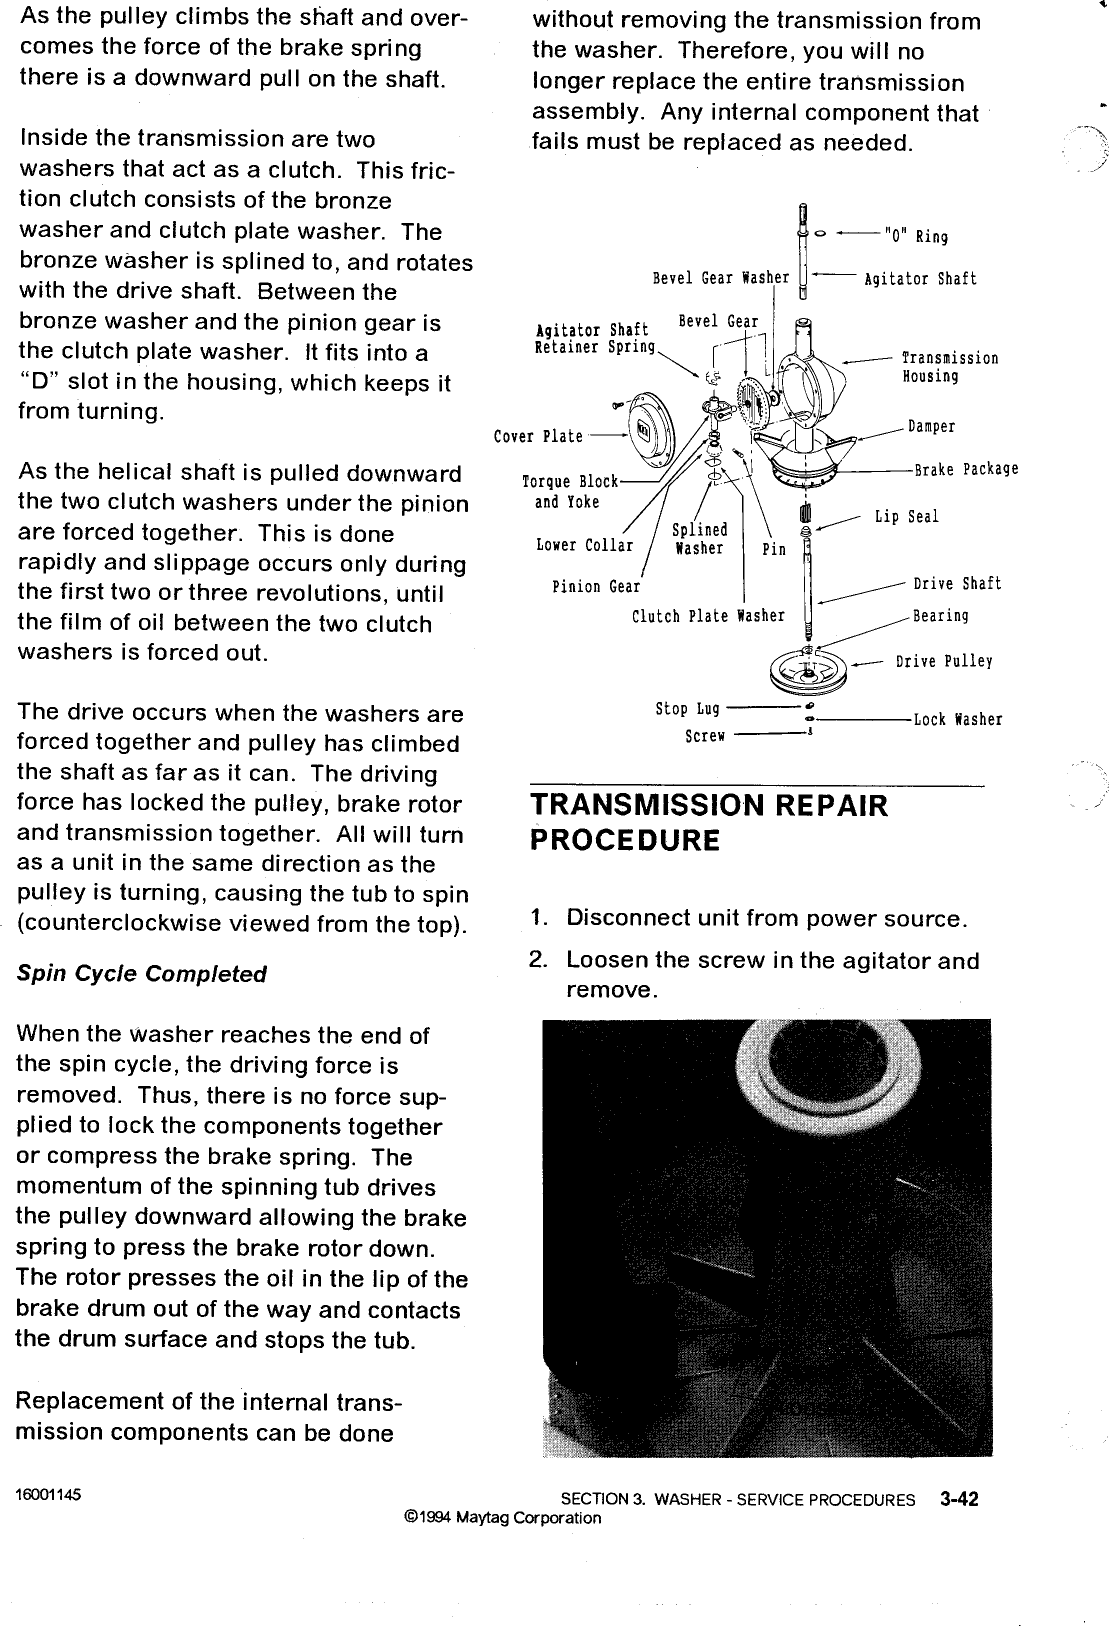 Page 4 of 9 - 16001145  MAYTAG Orbital Trans Prt Of